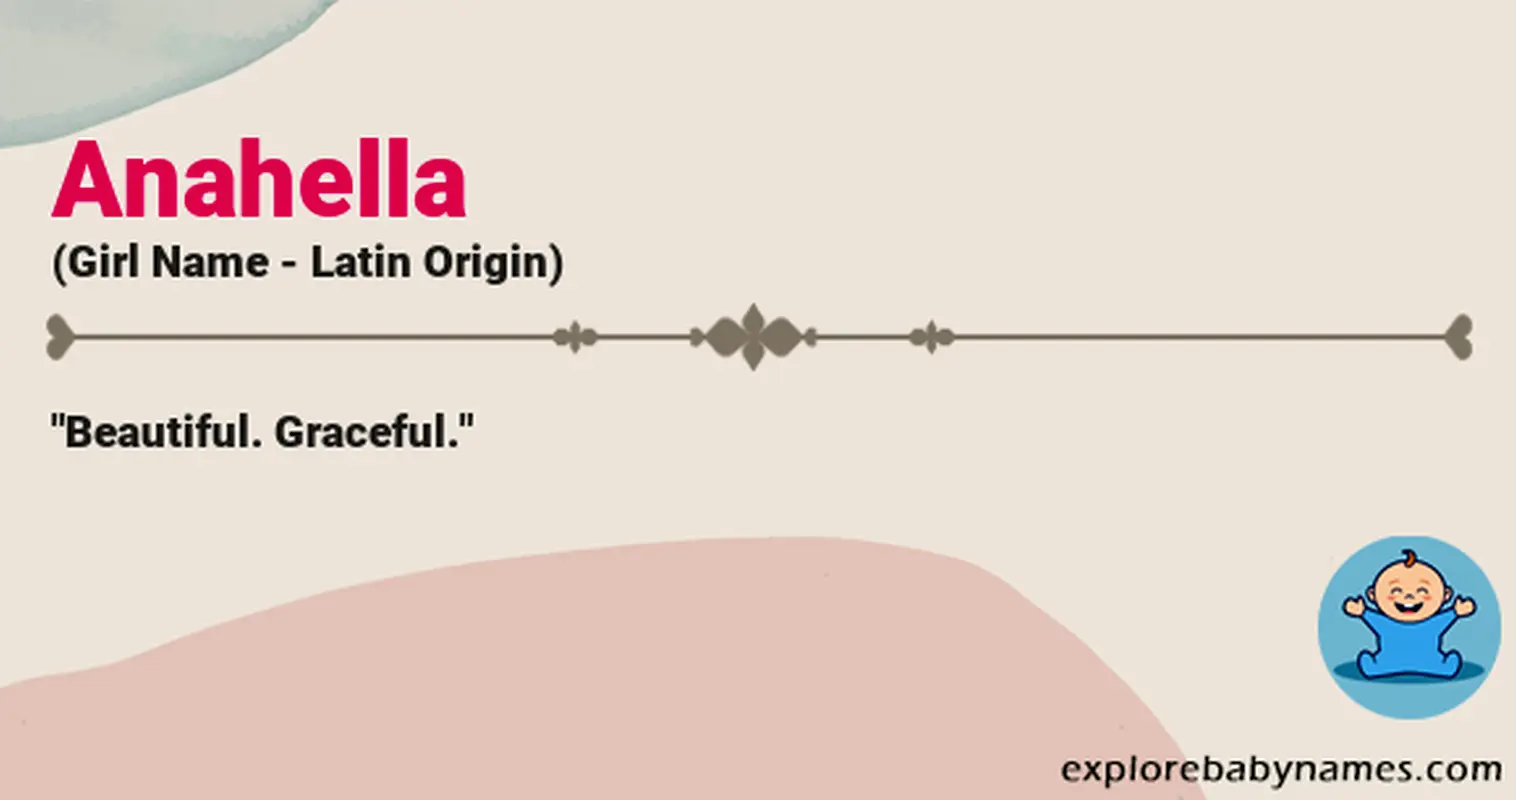 Meaning of Anahella